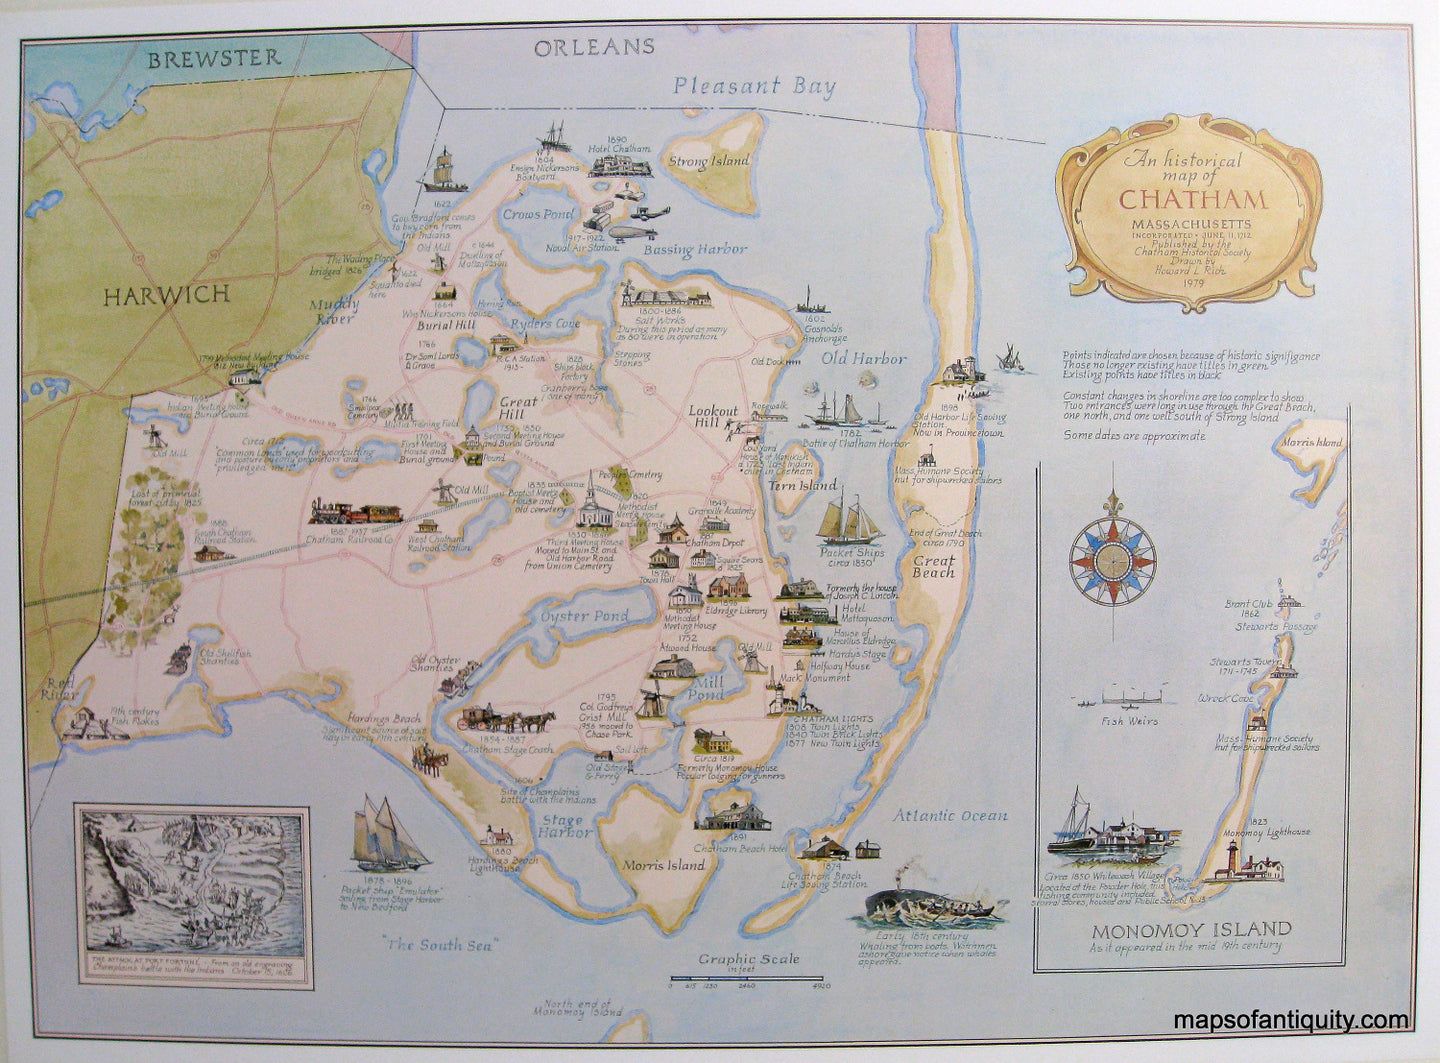 Reproduction-A-Historical-Map-of-Chatham-Massachusetts-1979---Reproduction---Reproductions-Cape-Cod-and-Islands-Reproduction-Rich-Maps-Of-Antiquity